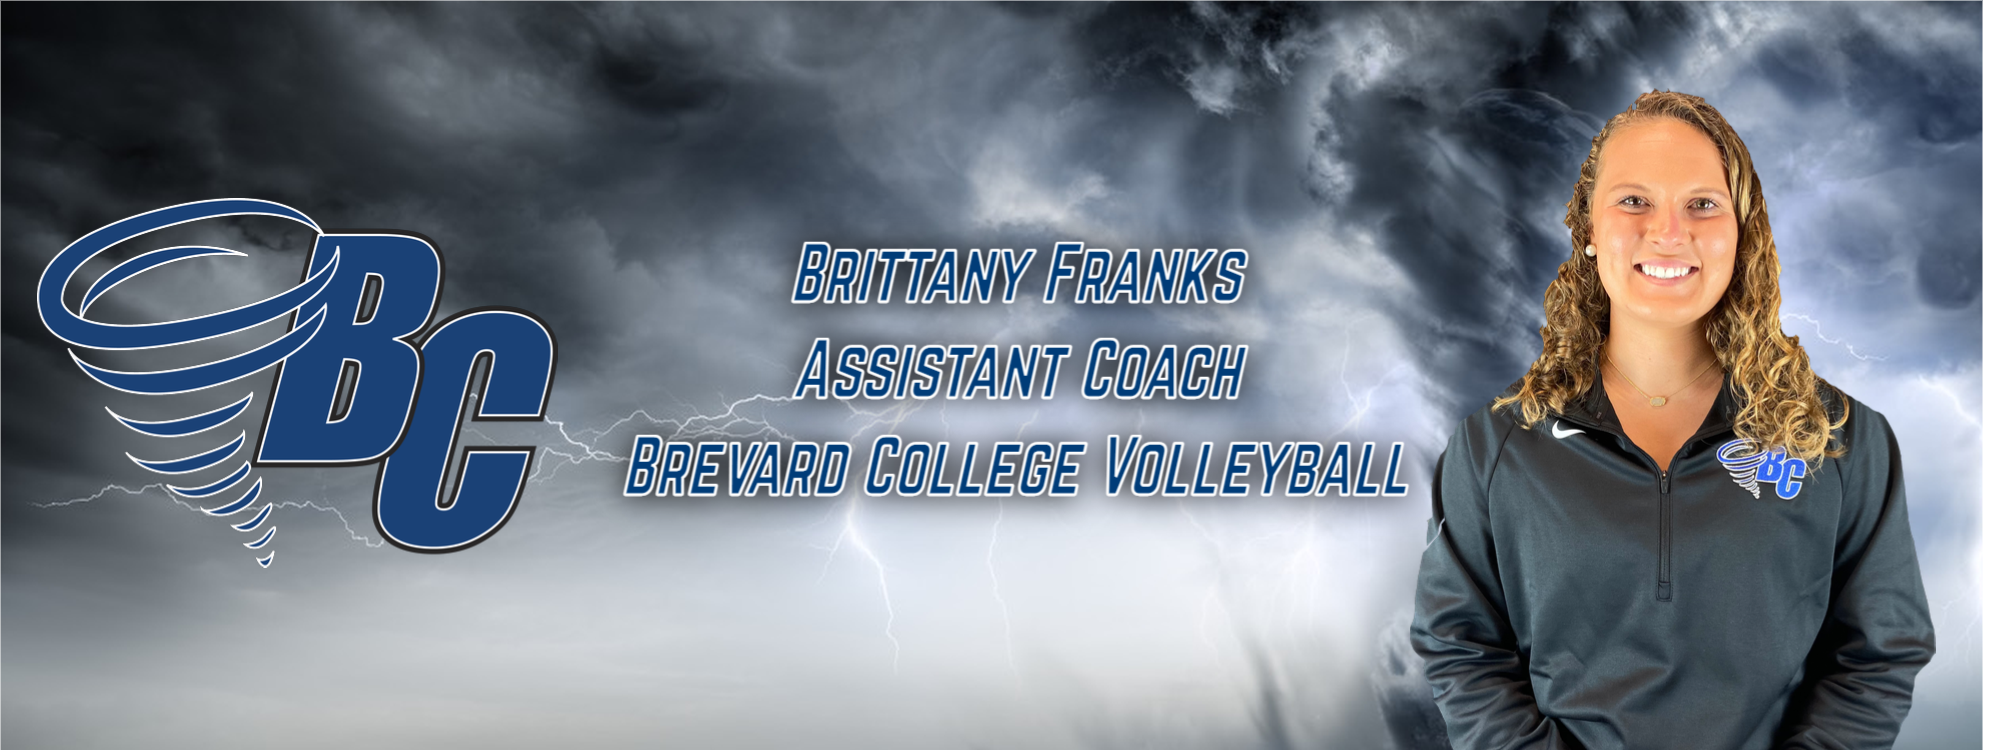 Brittany Franks Named Brevard College Assistant Volleyball Coach